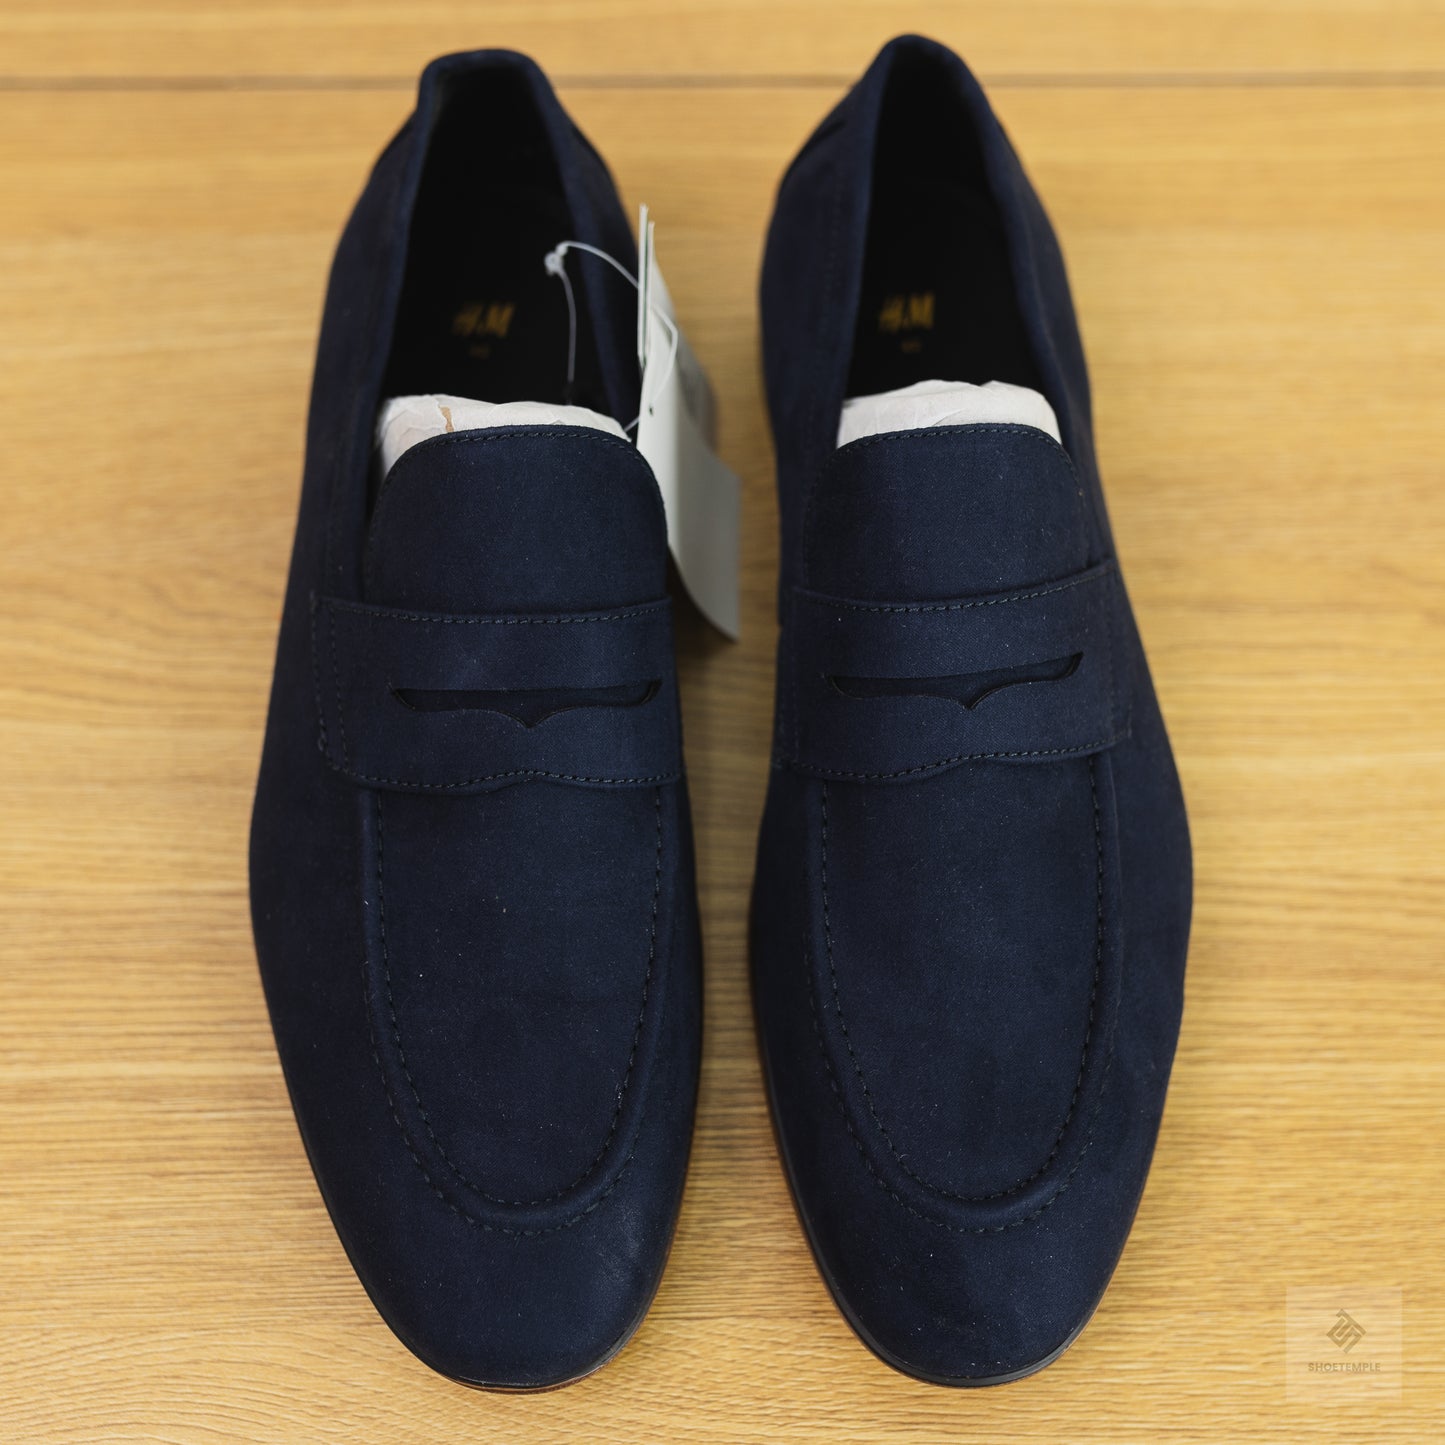 HNM Suede Penny Loafer